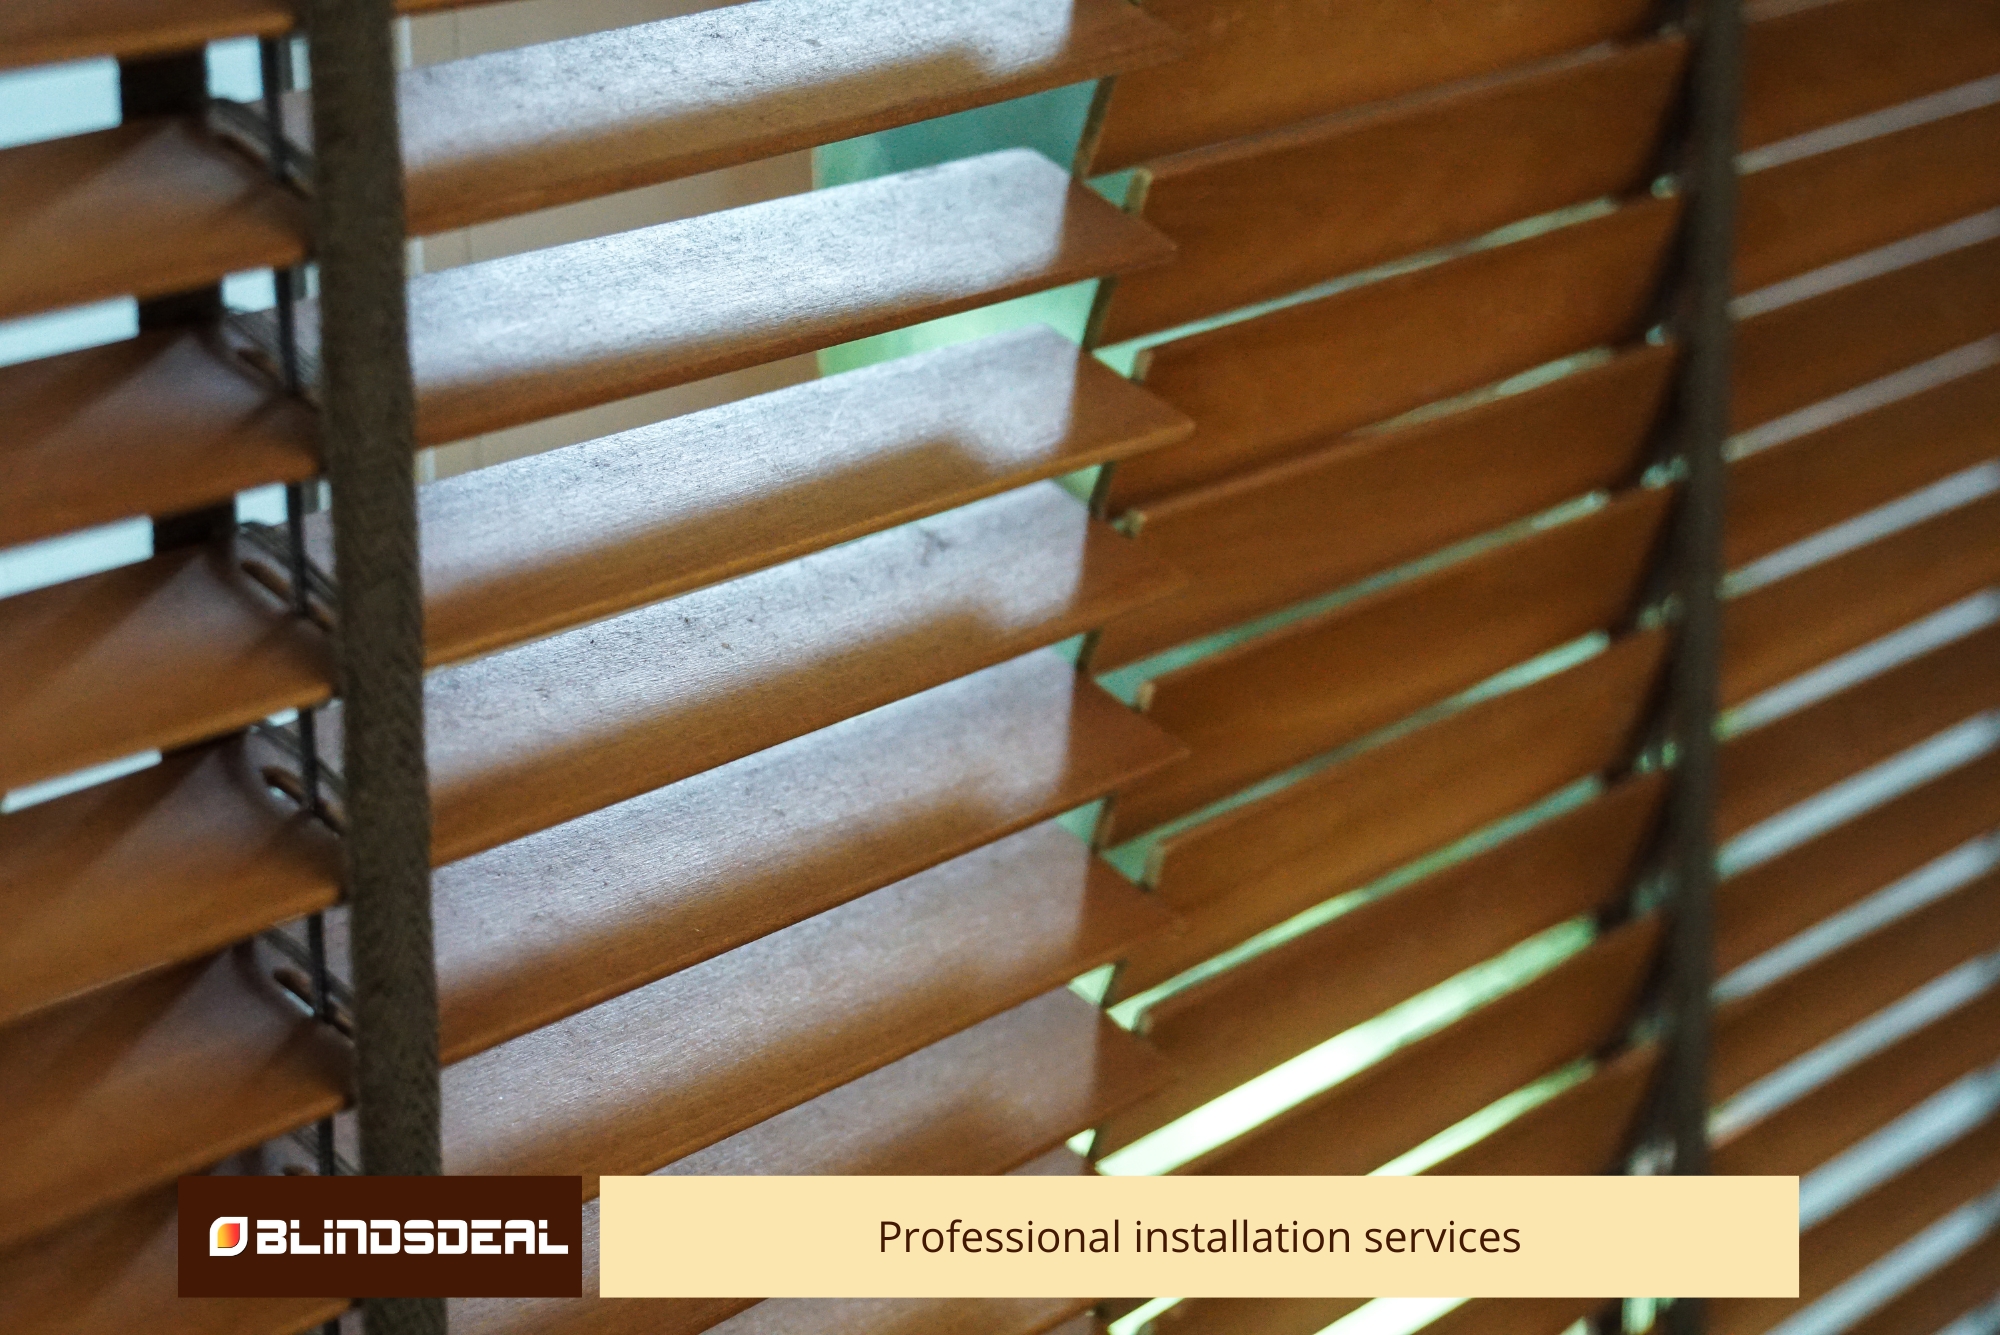 Professional installation services